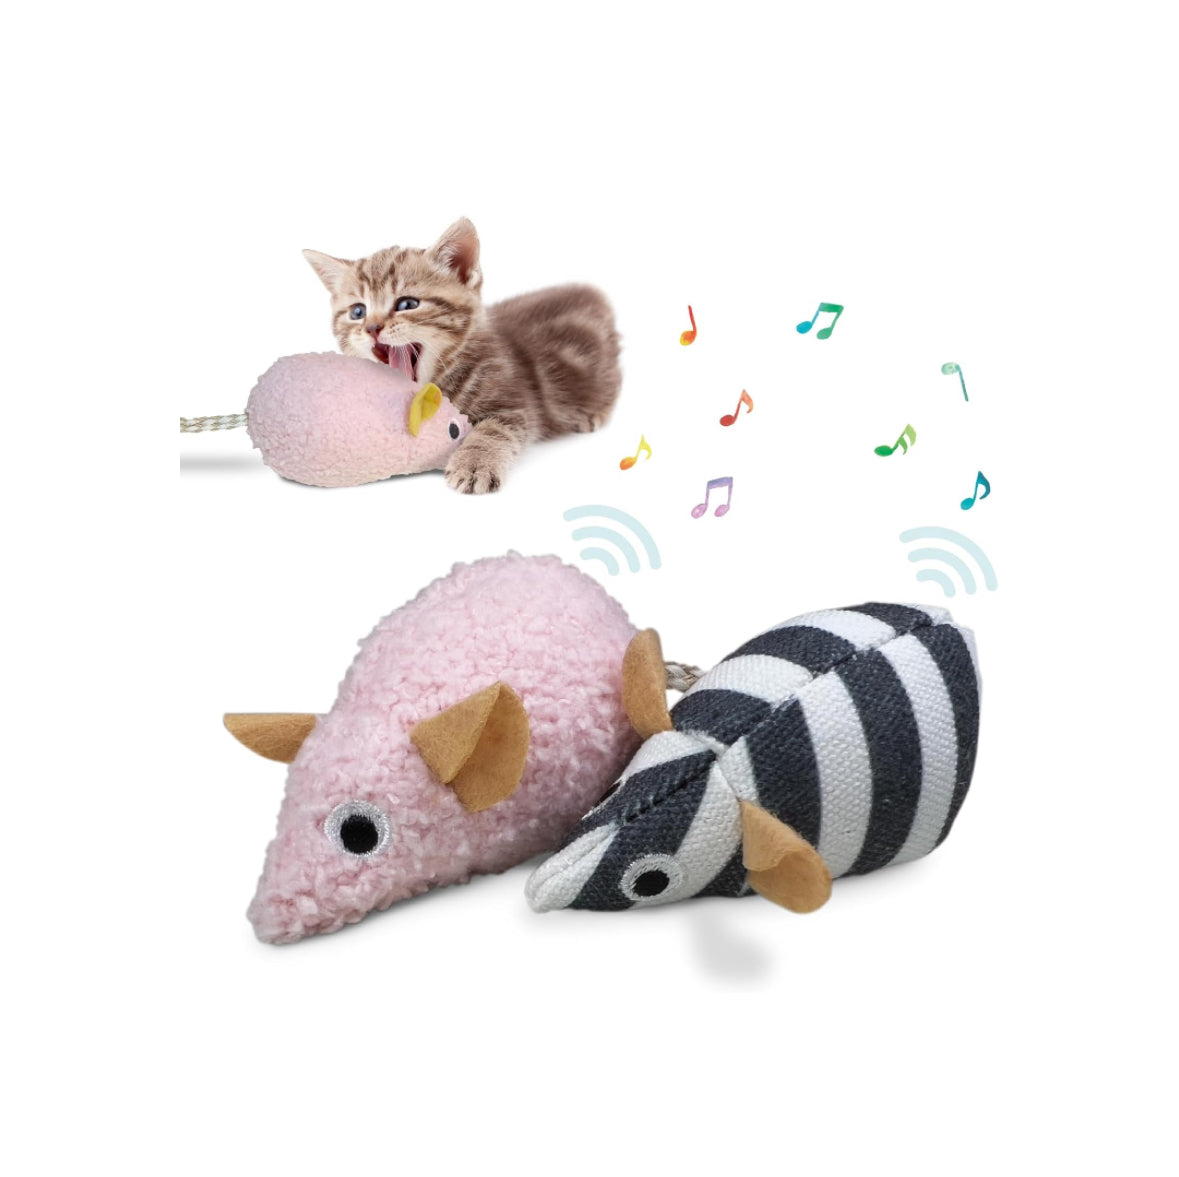 Toothpaste Oral Care Cat Toys Toys Touching and Sounding Mouses (2 pieces) Chewing Toys